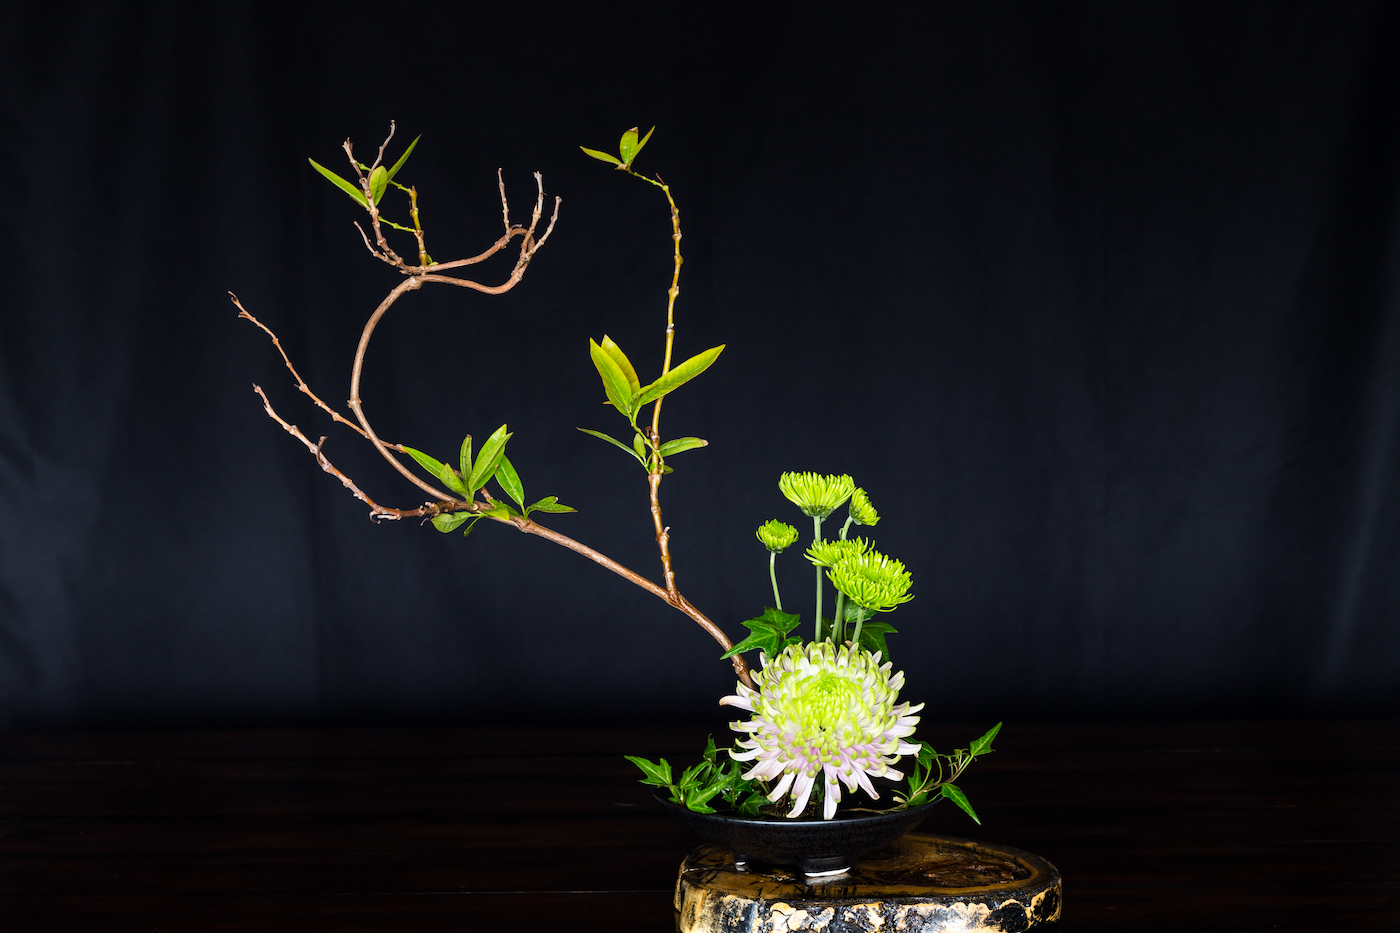 Ikebana, a Japanese flower arrangement, simply puts flowers in a container.